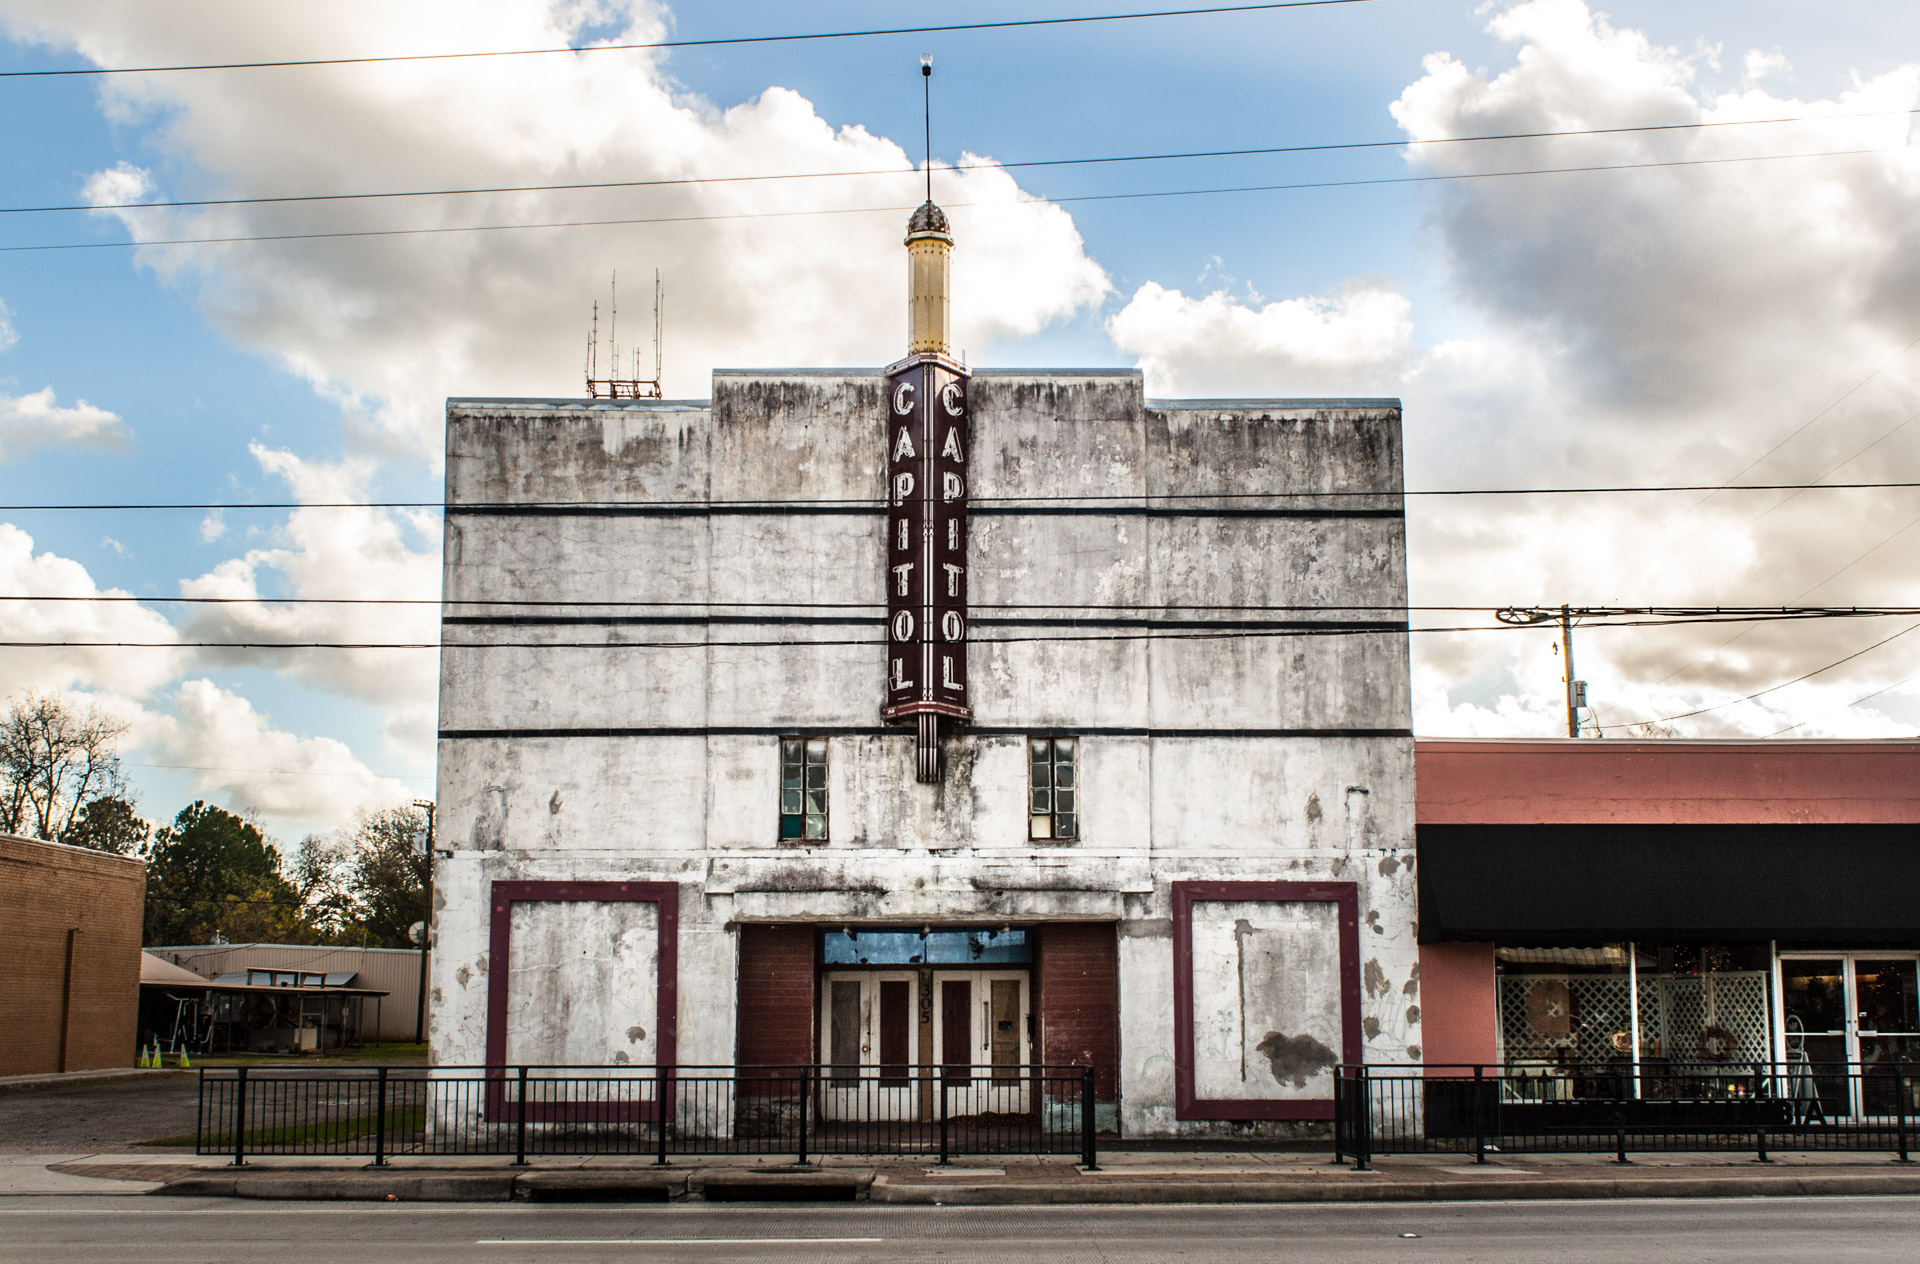 West Columbia, Texas - The Capitol Theater (front far)